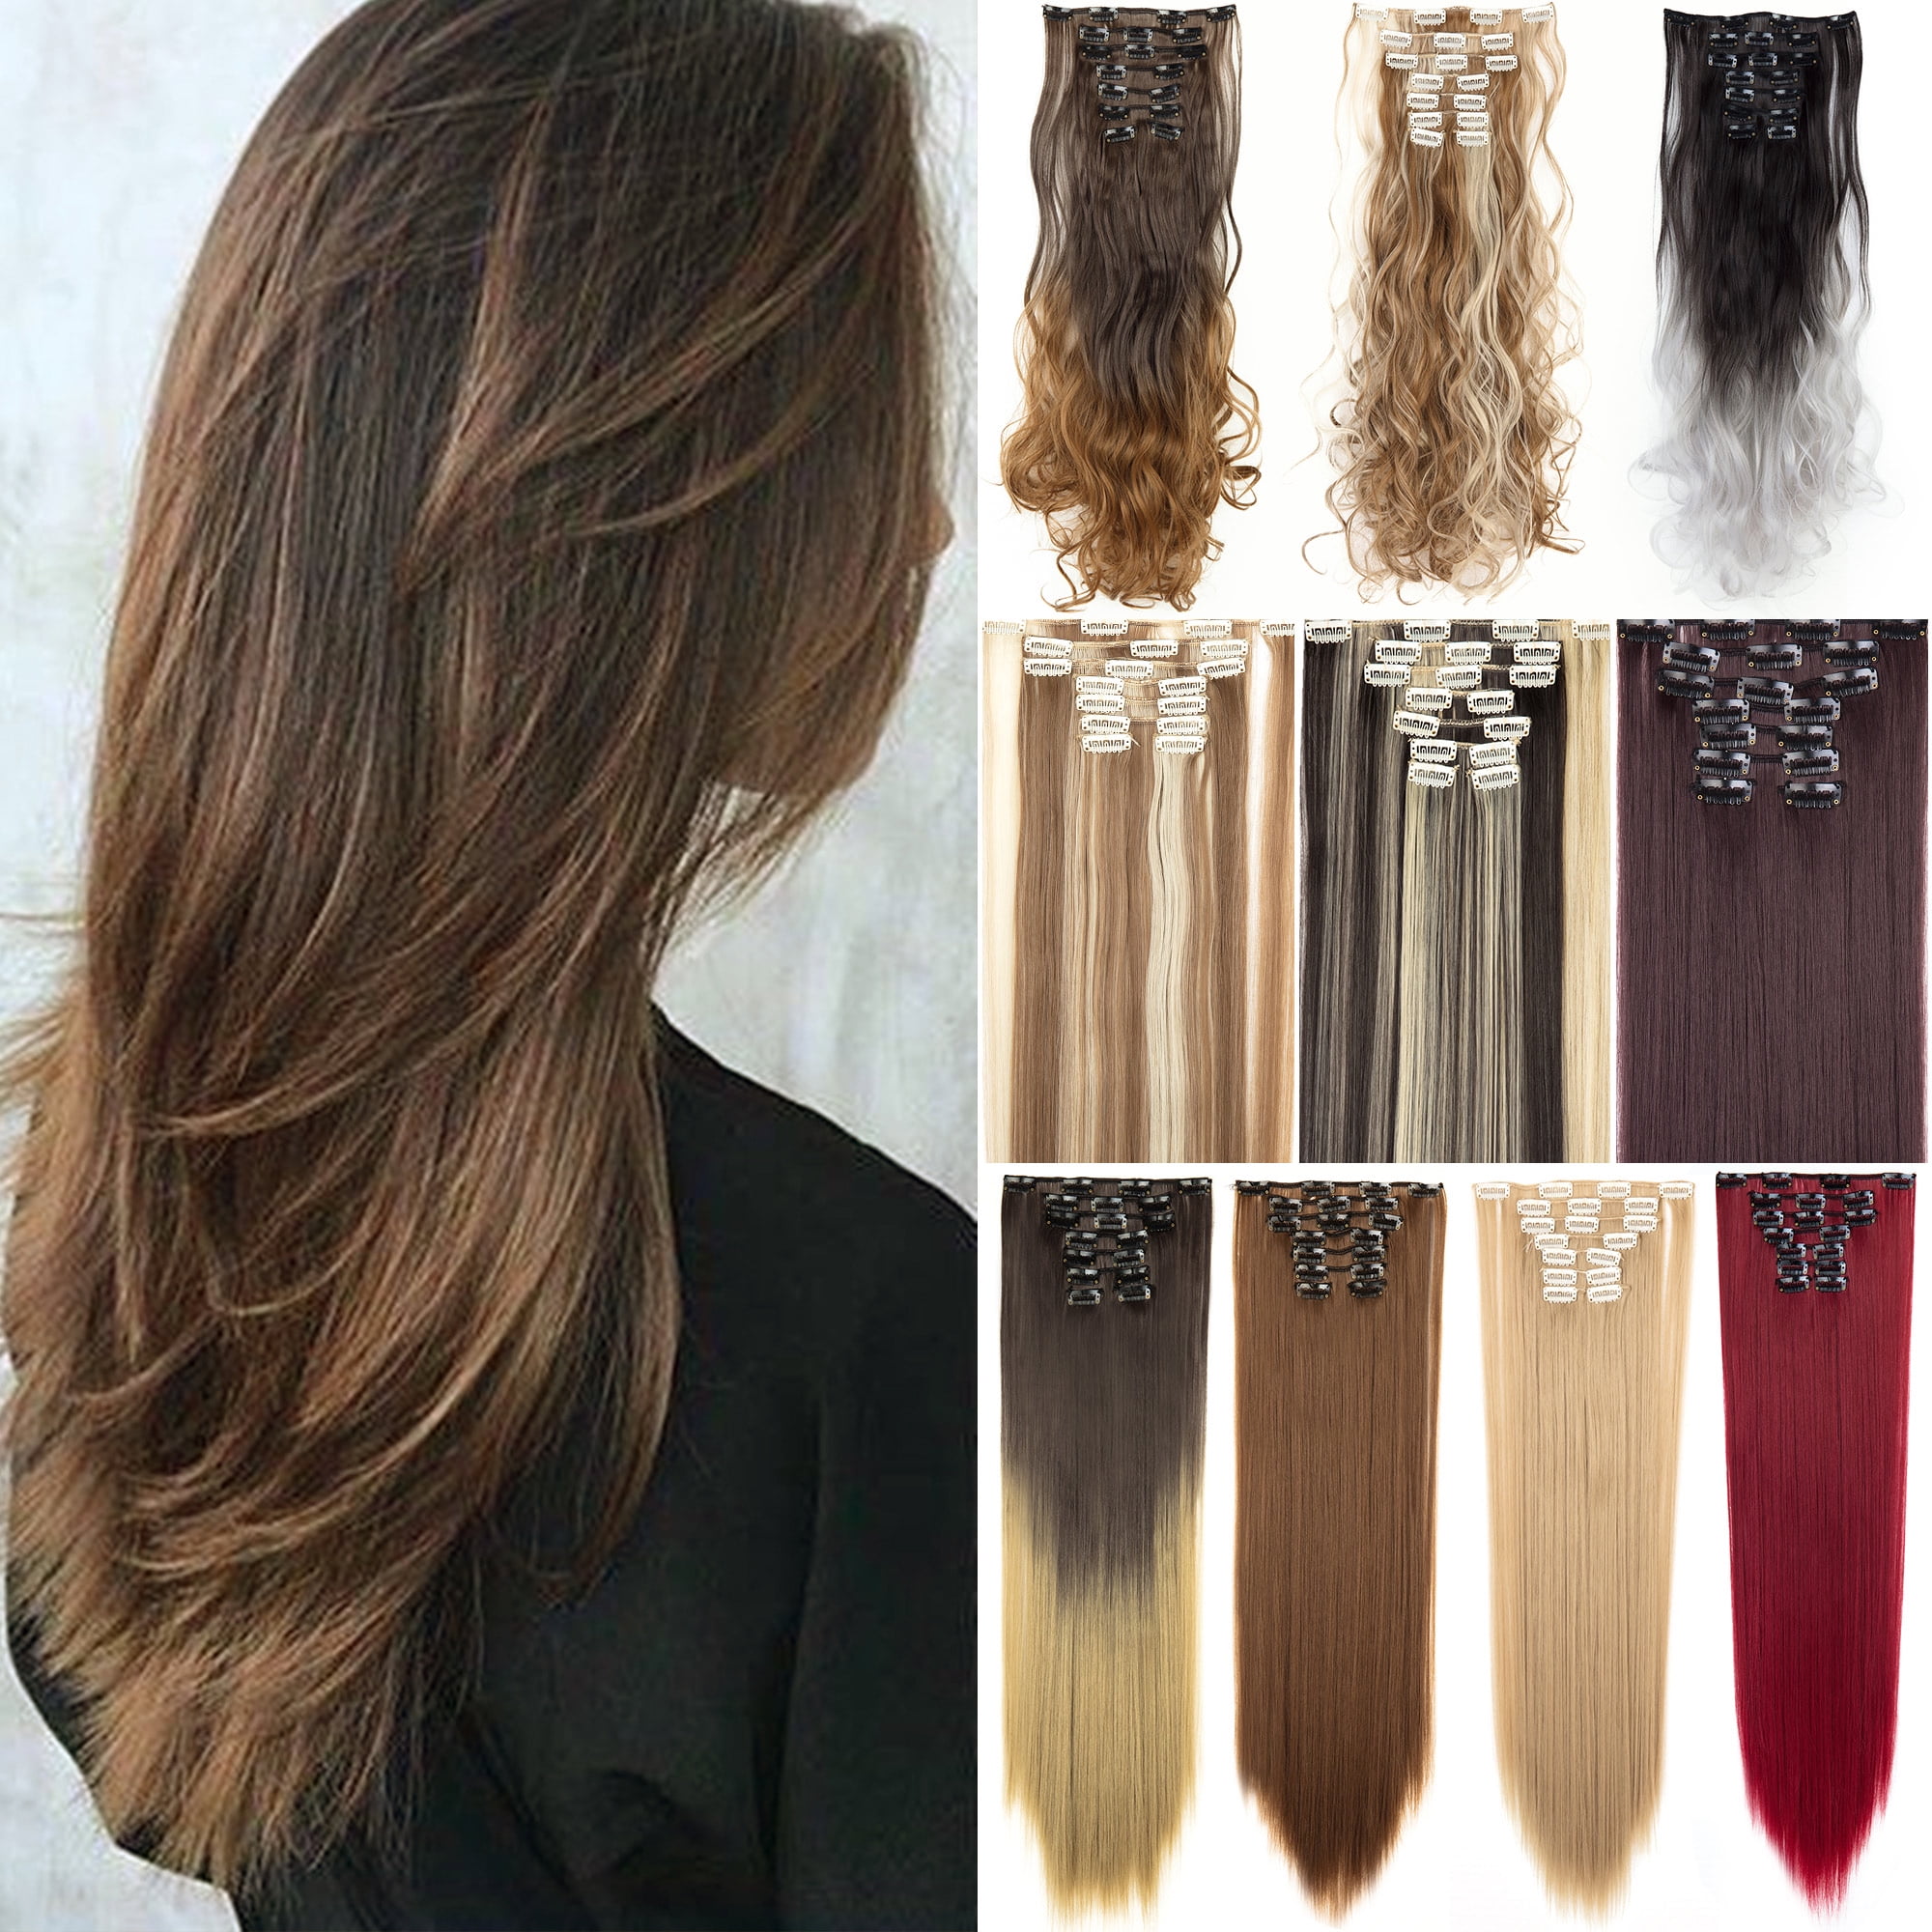 Professional Hair Extension Tools Kit - Art Hair Extension